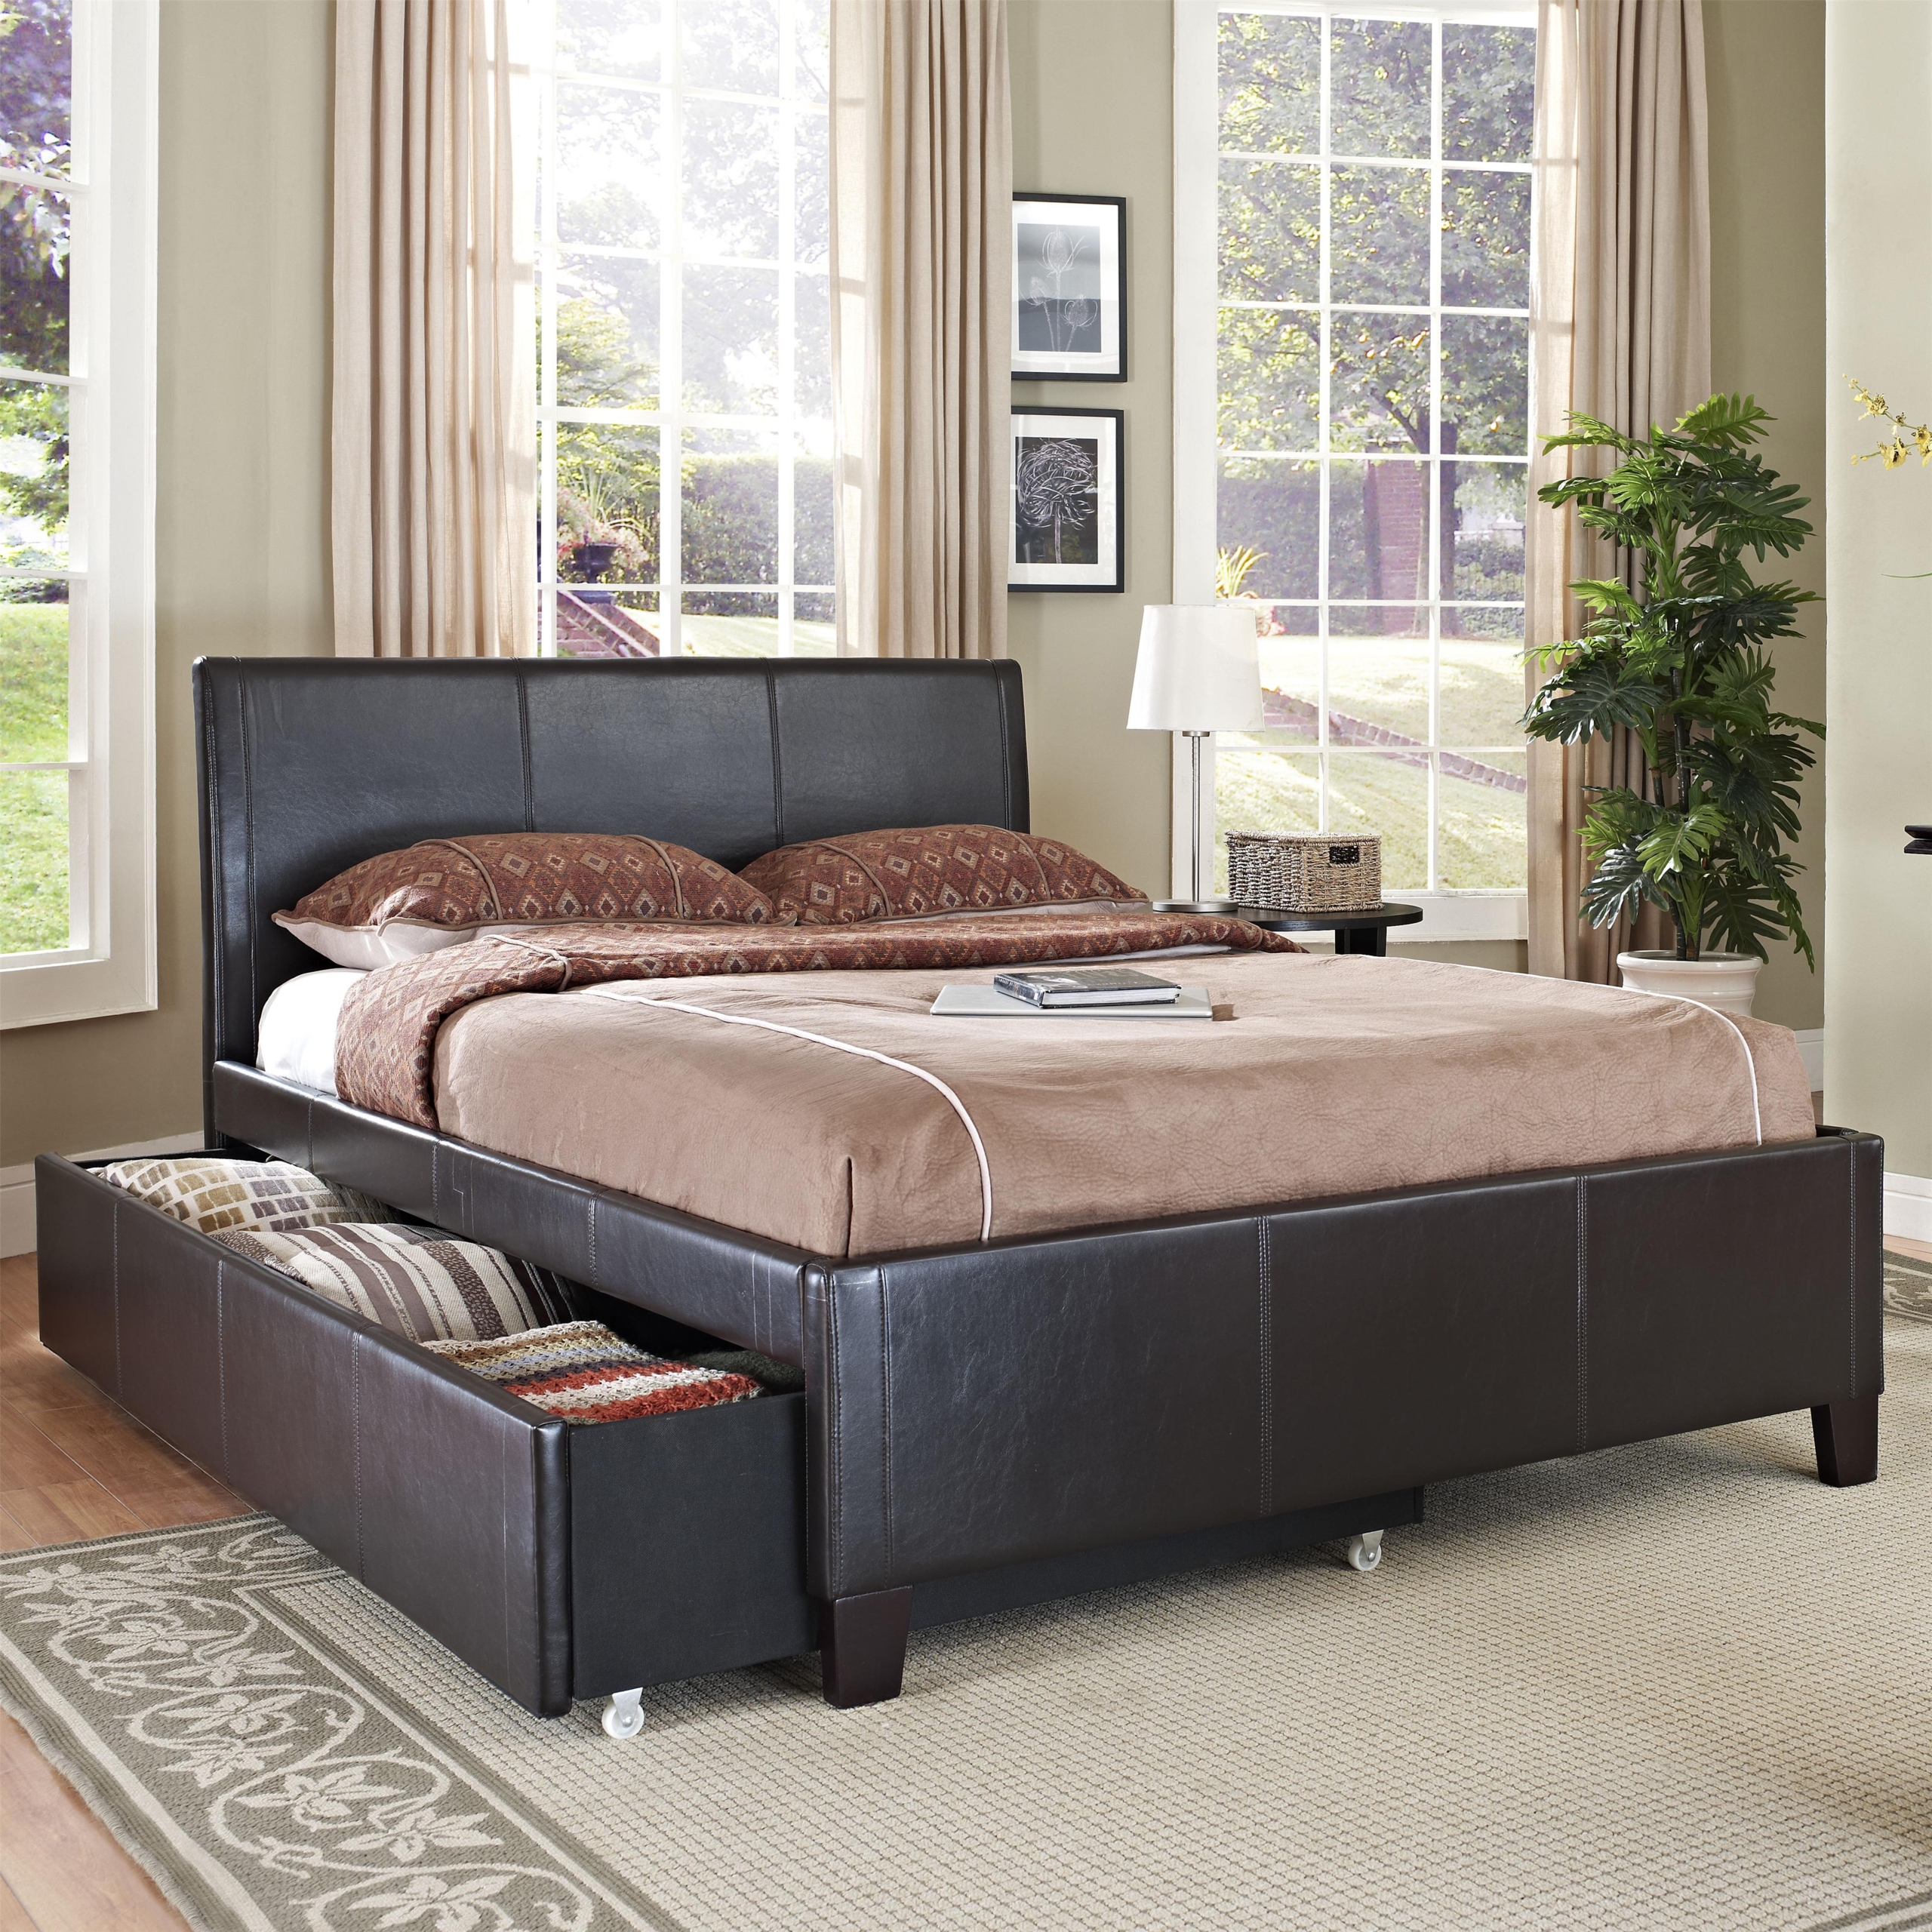 Trundle bed full size